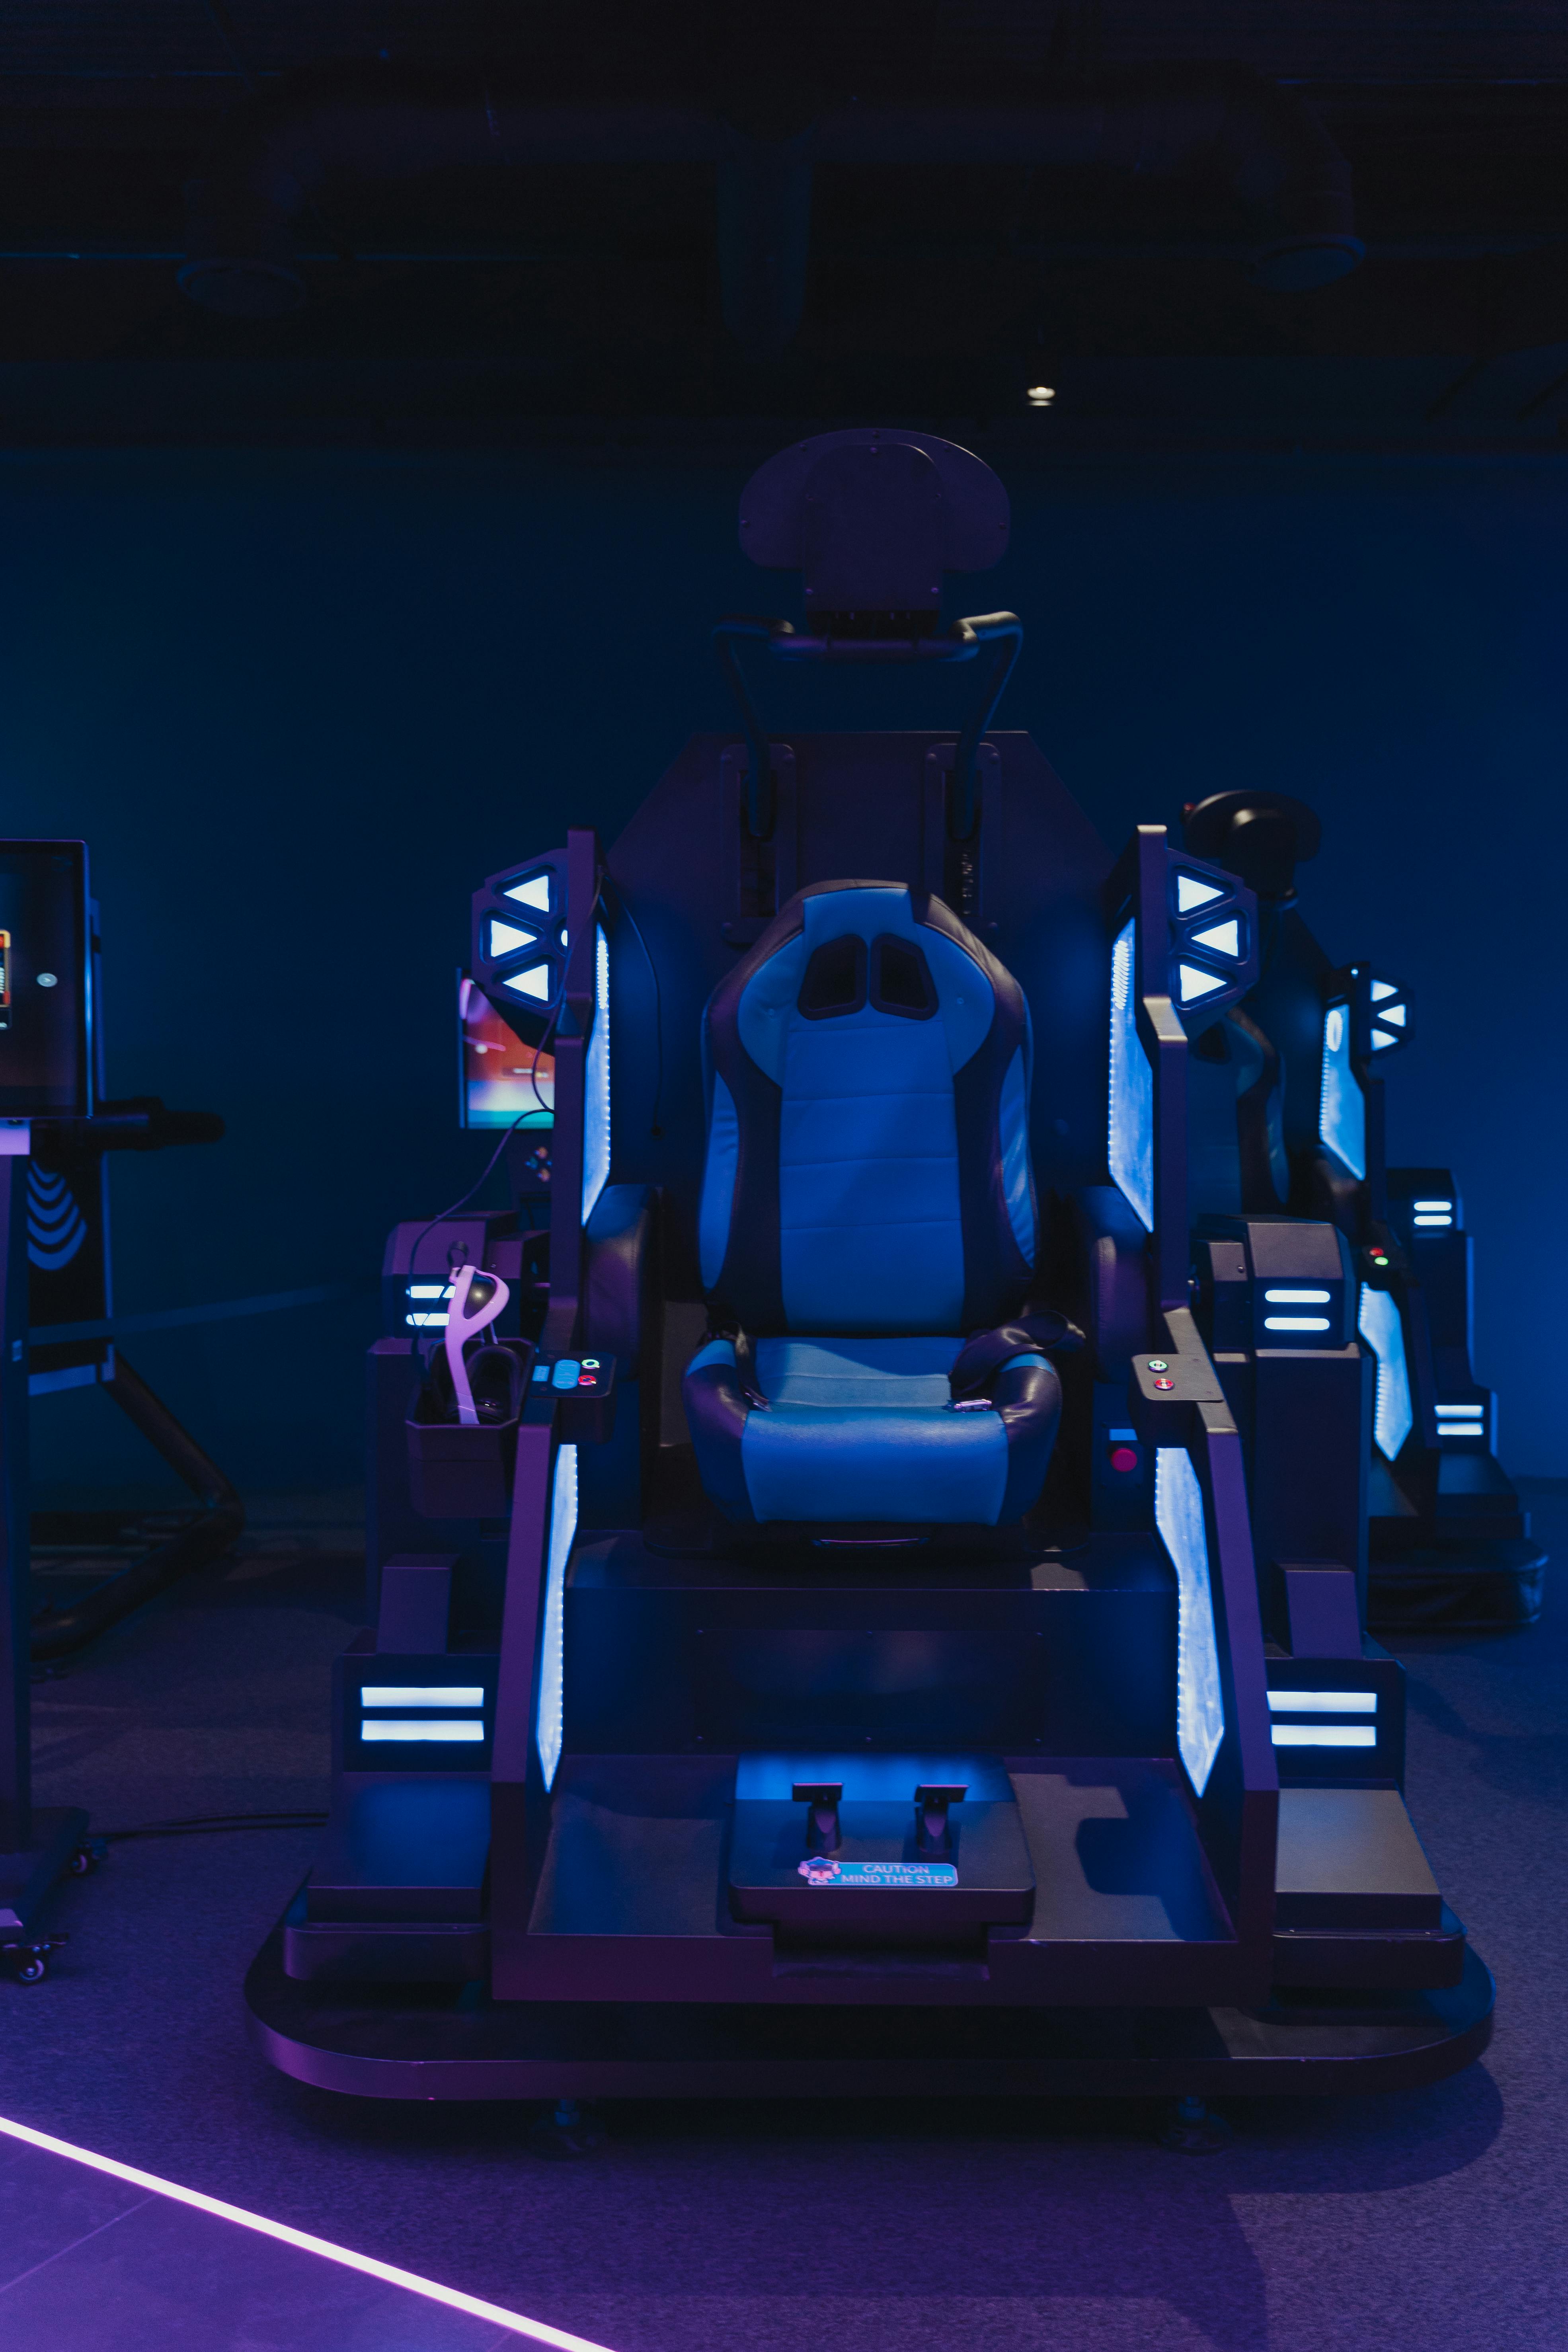 a gaming chair in the arcade